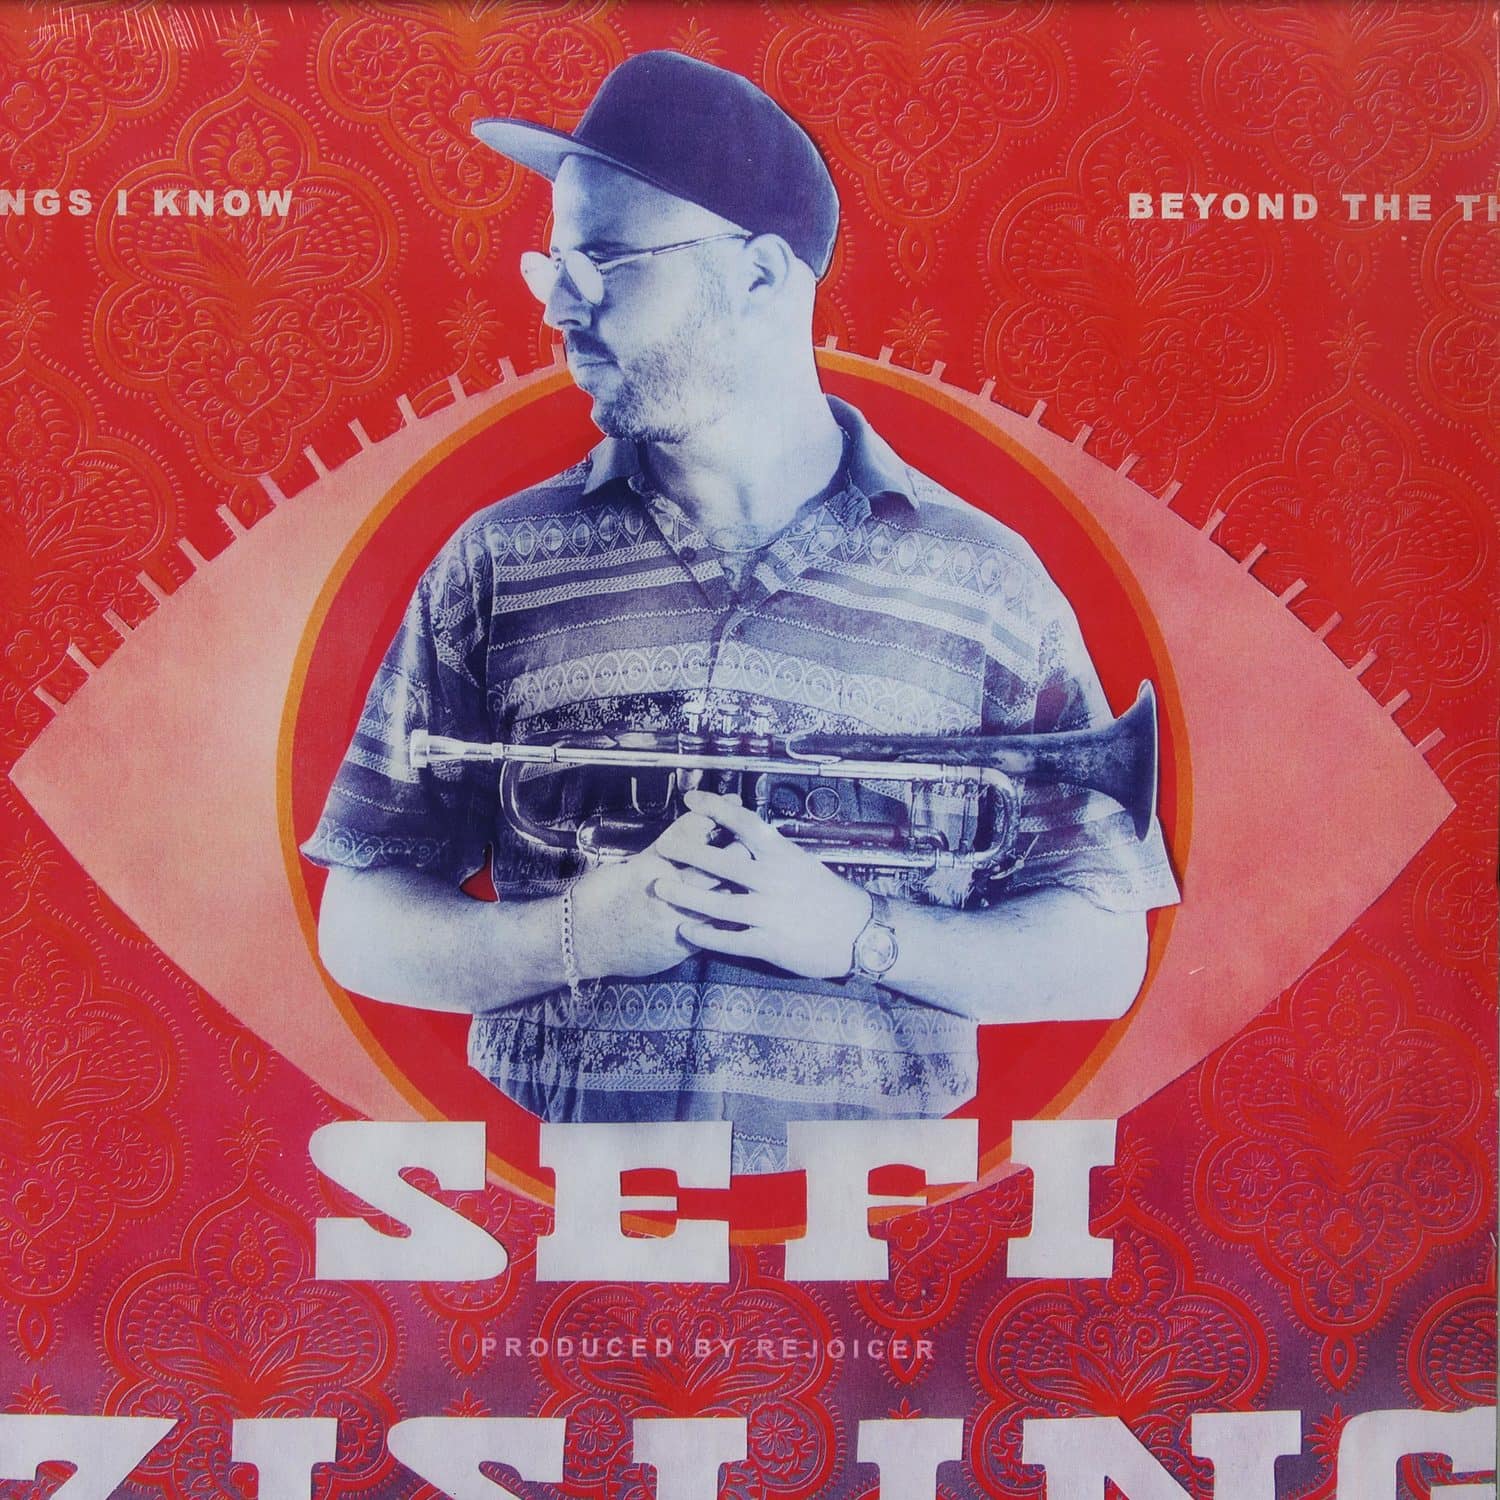 Sefi Zisling - BEYOND THE THINGS I KNOW